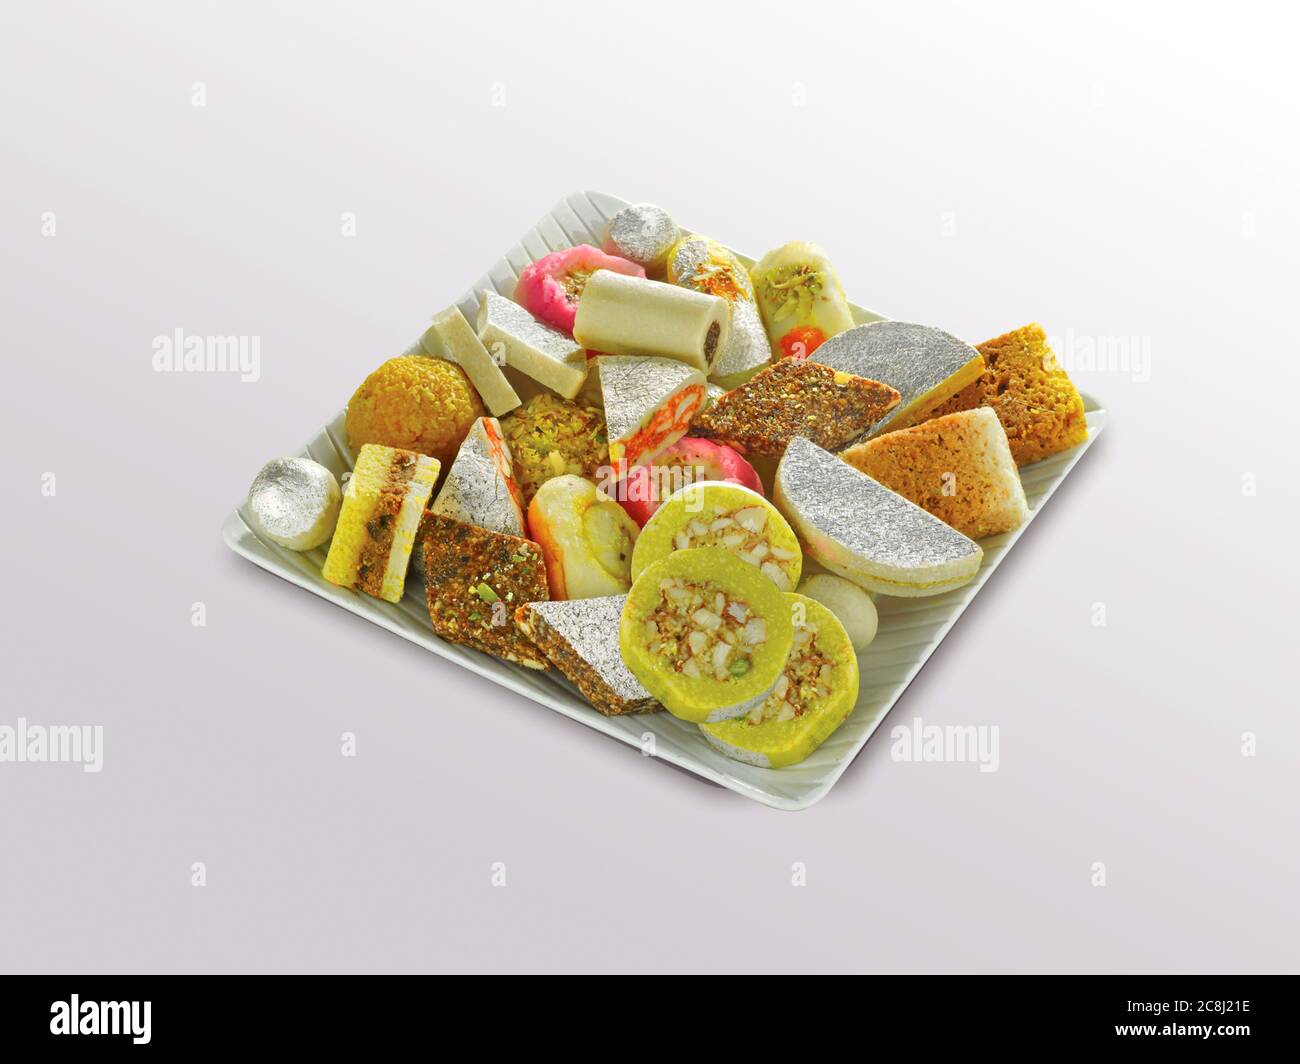 Stock photo of Indian sweets served in silver or wooden plate. variety of Peda, burfi, laddu in decorative plate, selective focus Stock Photo